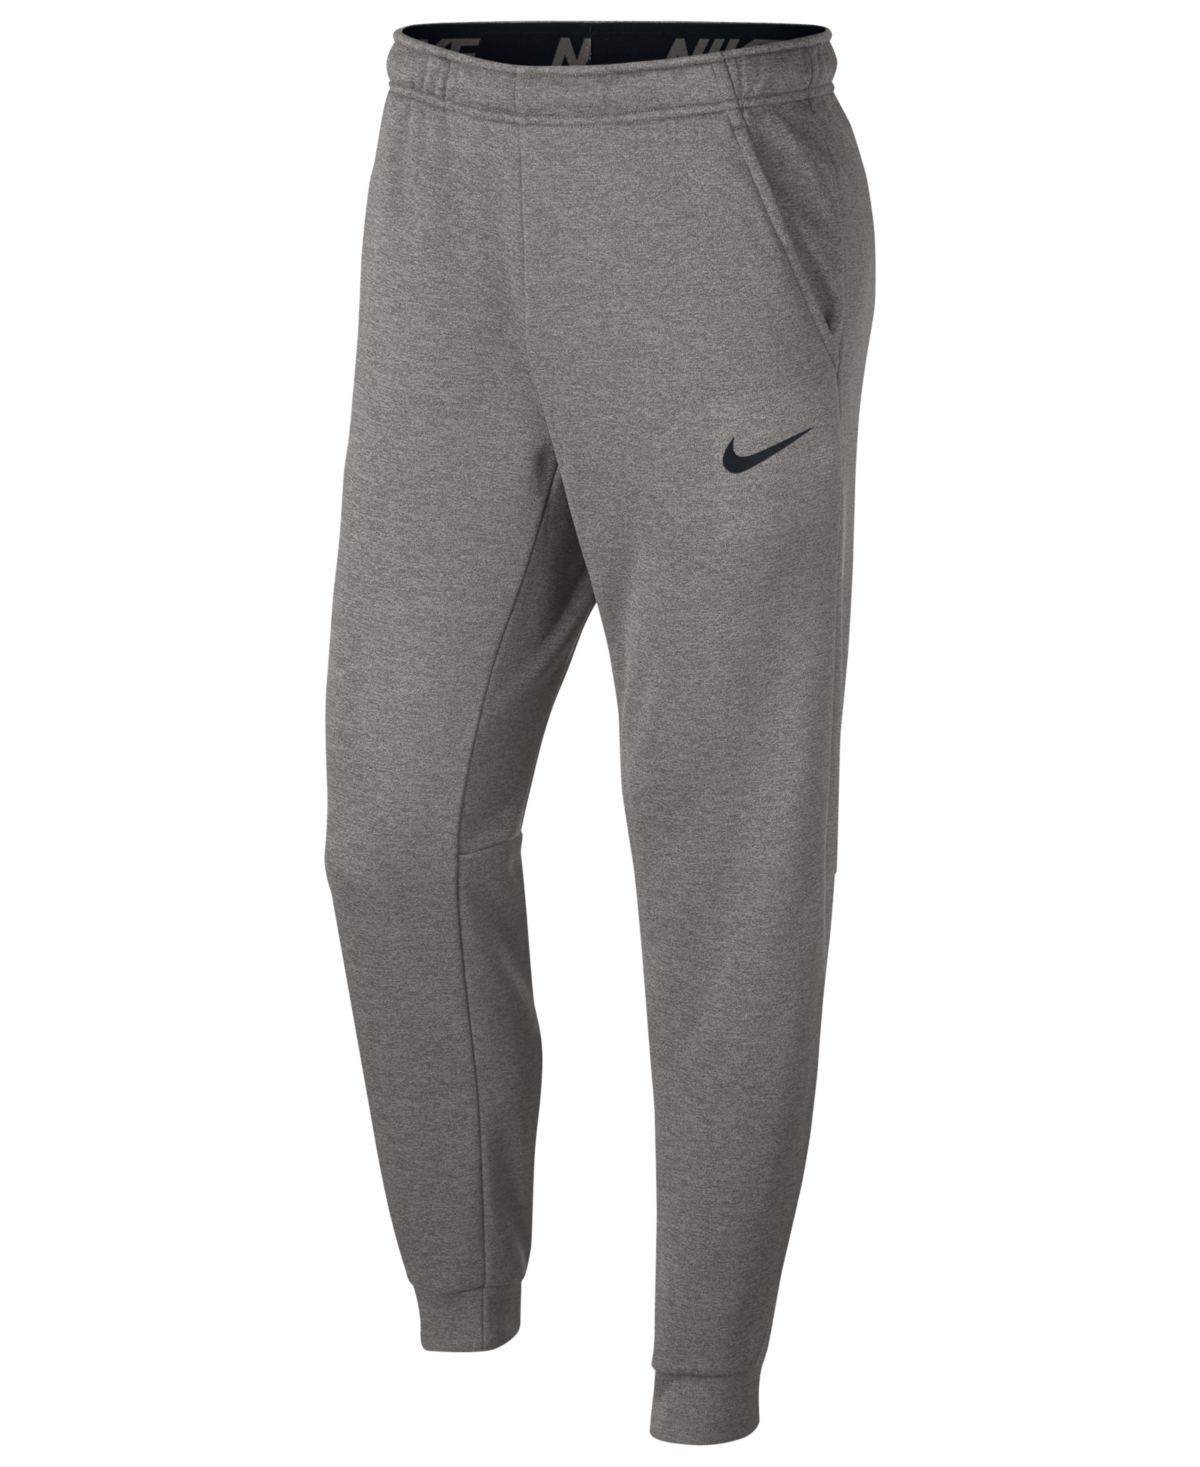 UPC 886668340364 product image for Nike Men's Therma Tapered Training Pants | upcitemdb.com